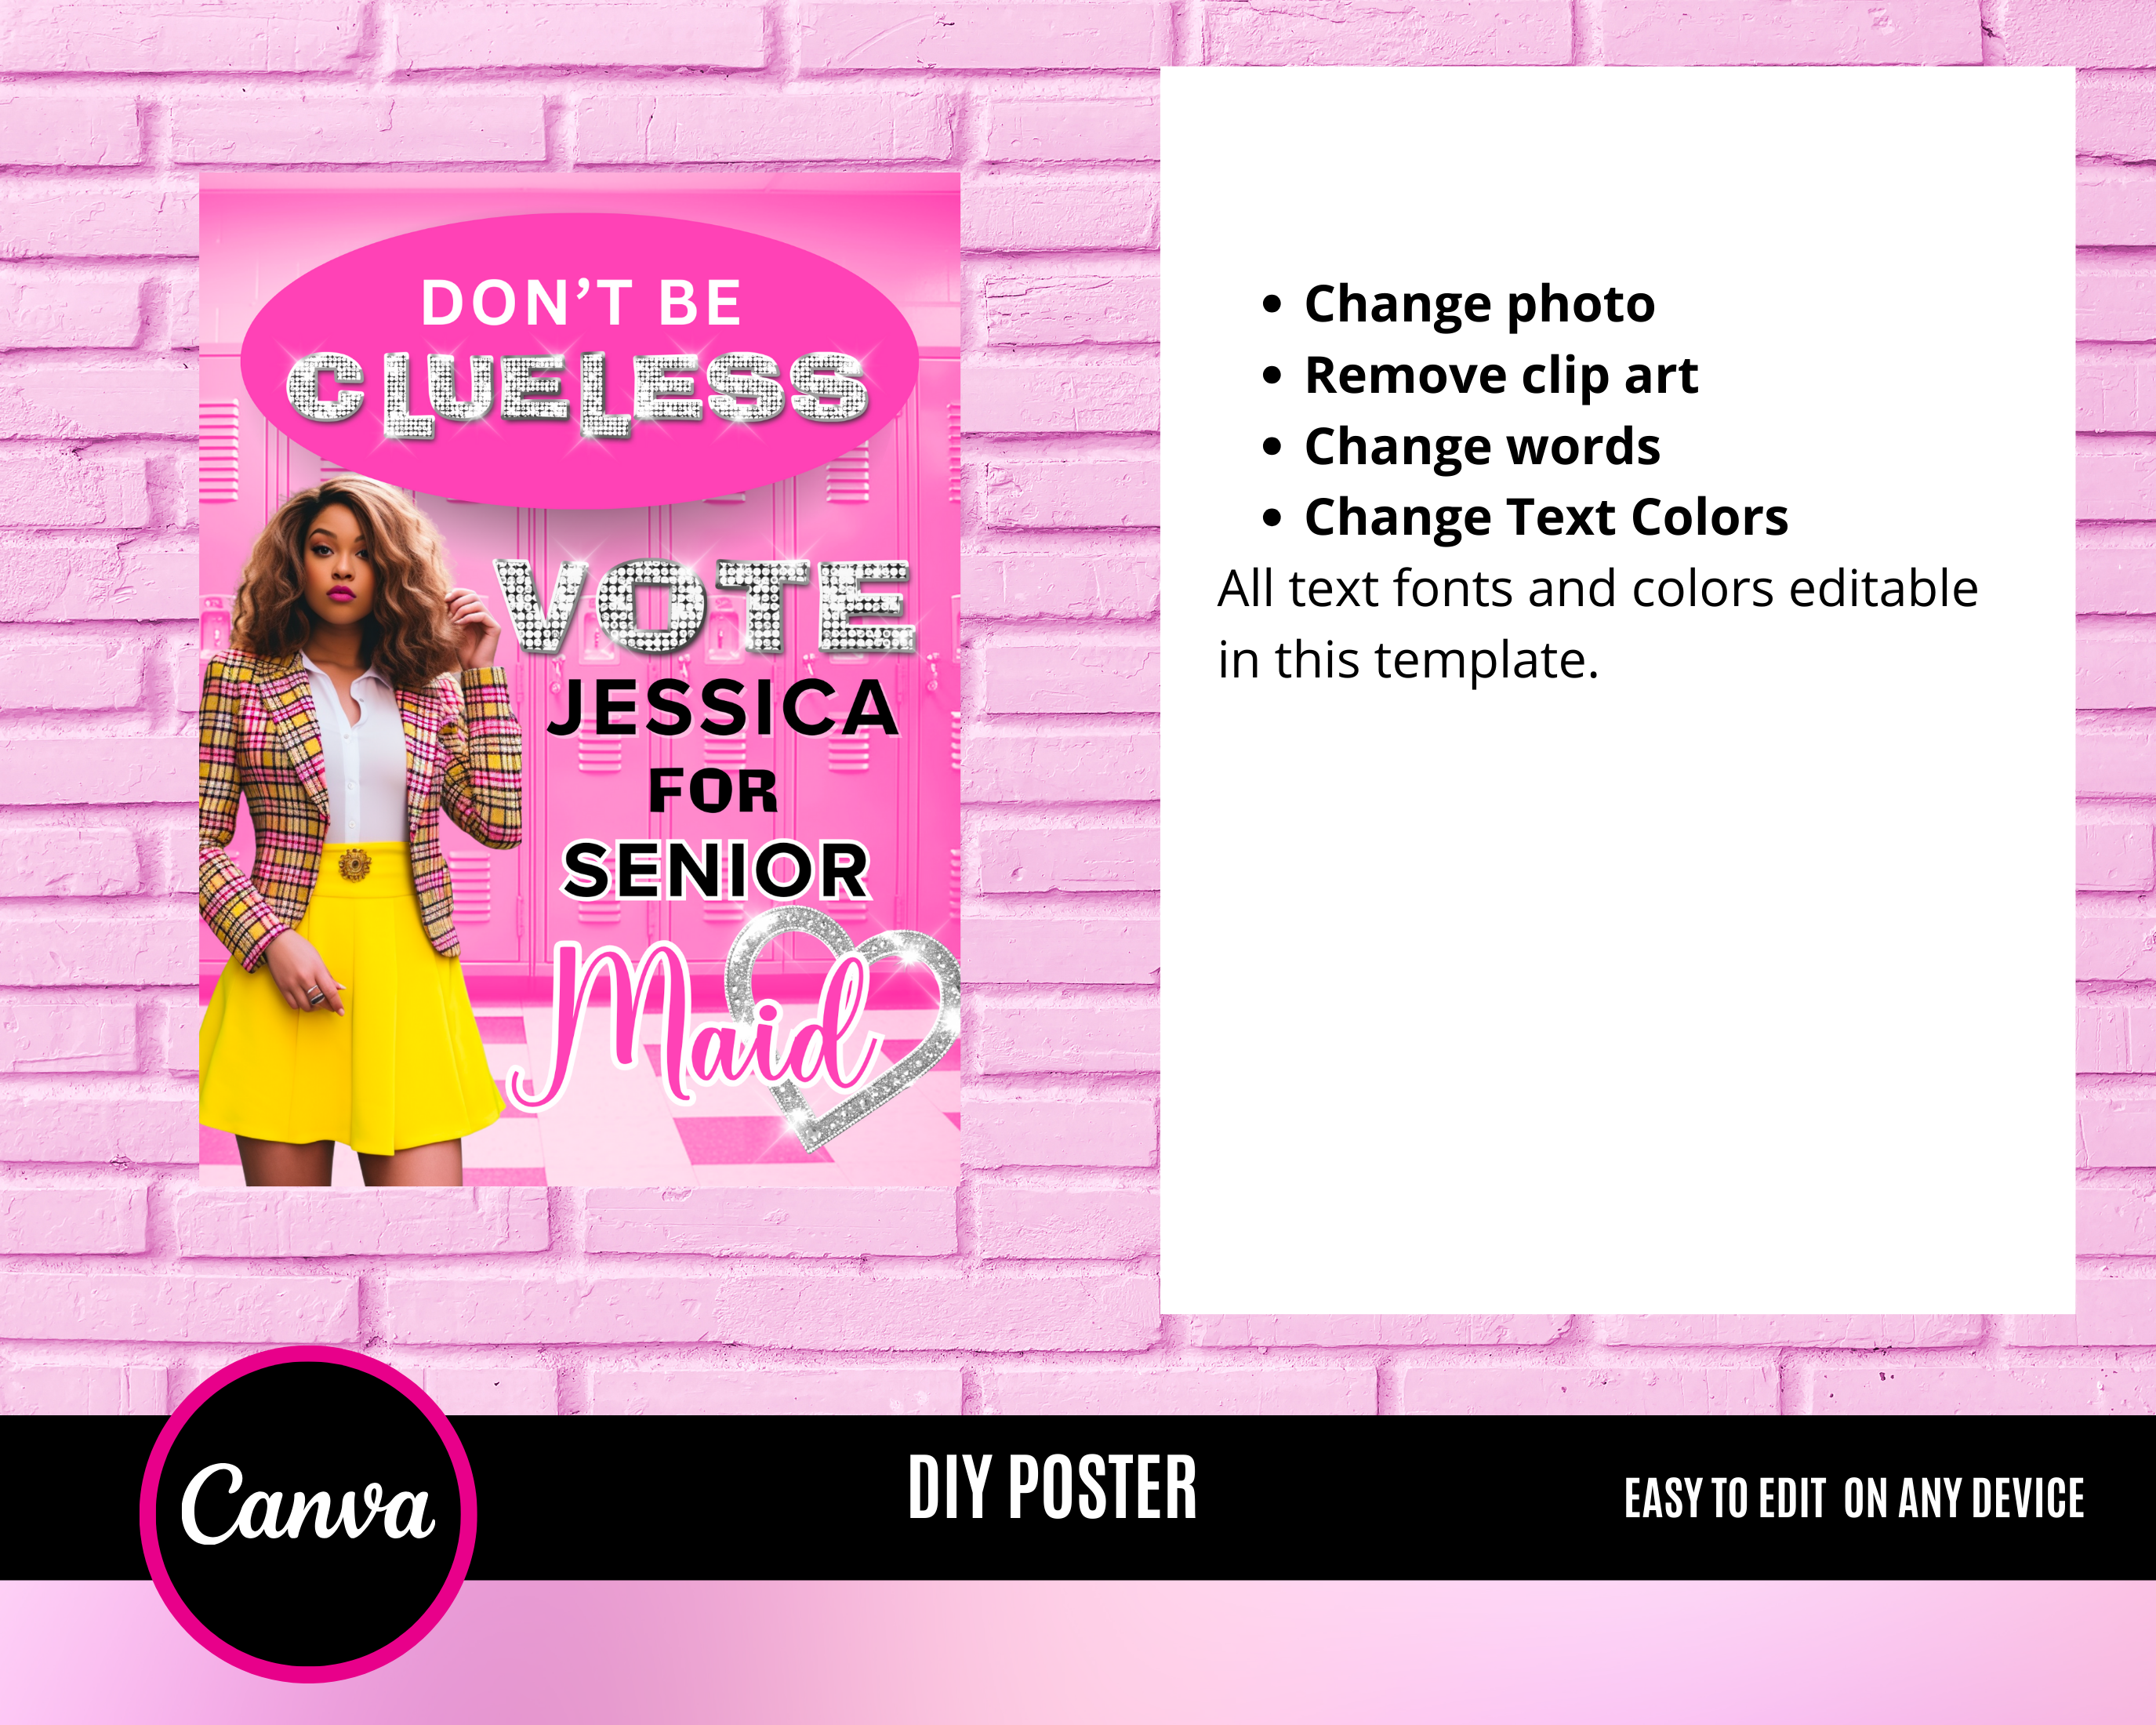 Clueless HOCO Campaign Poster - School